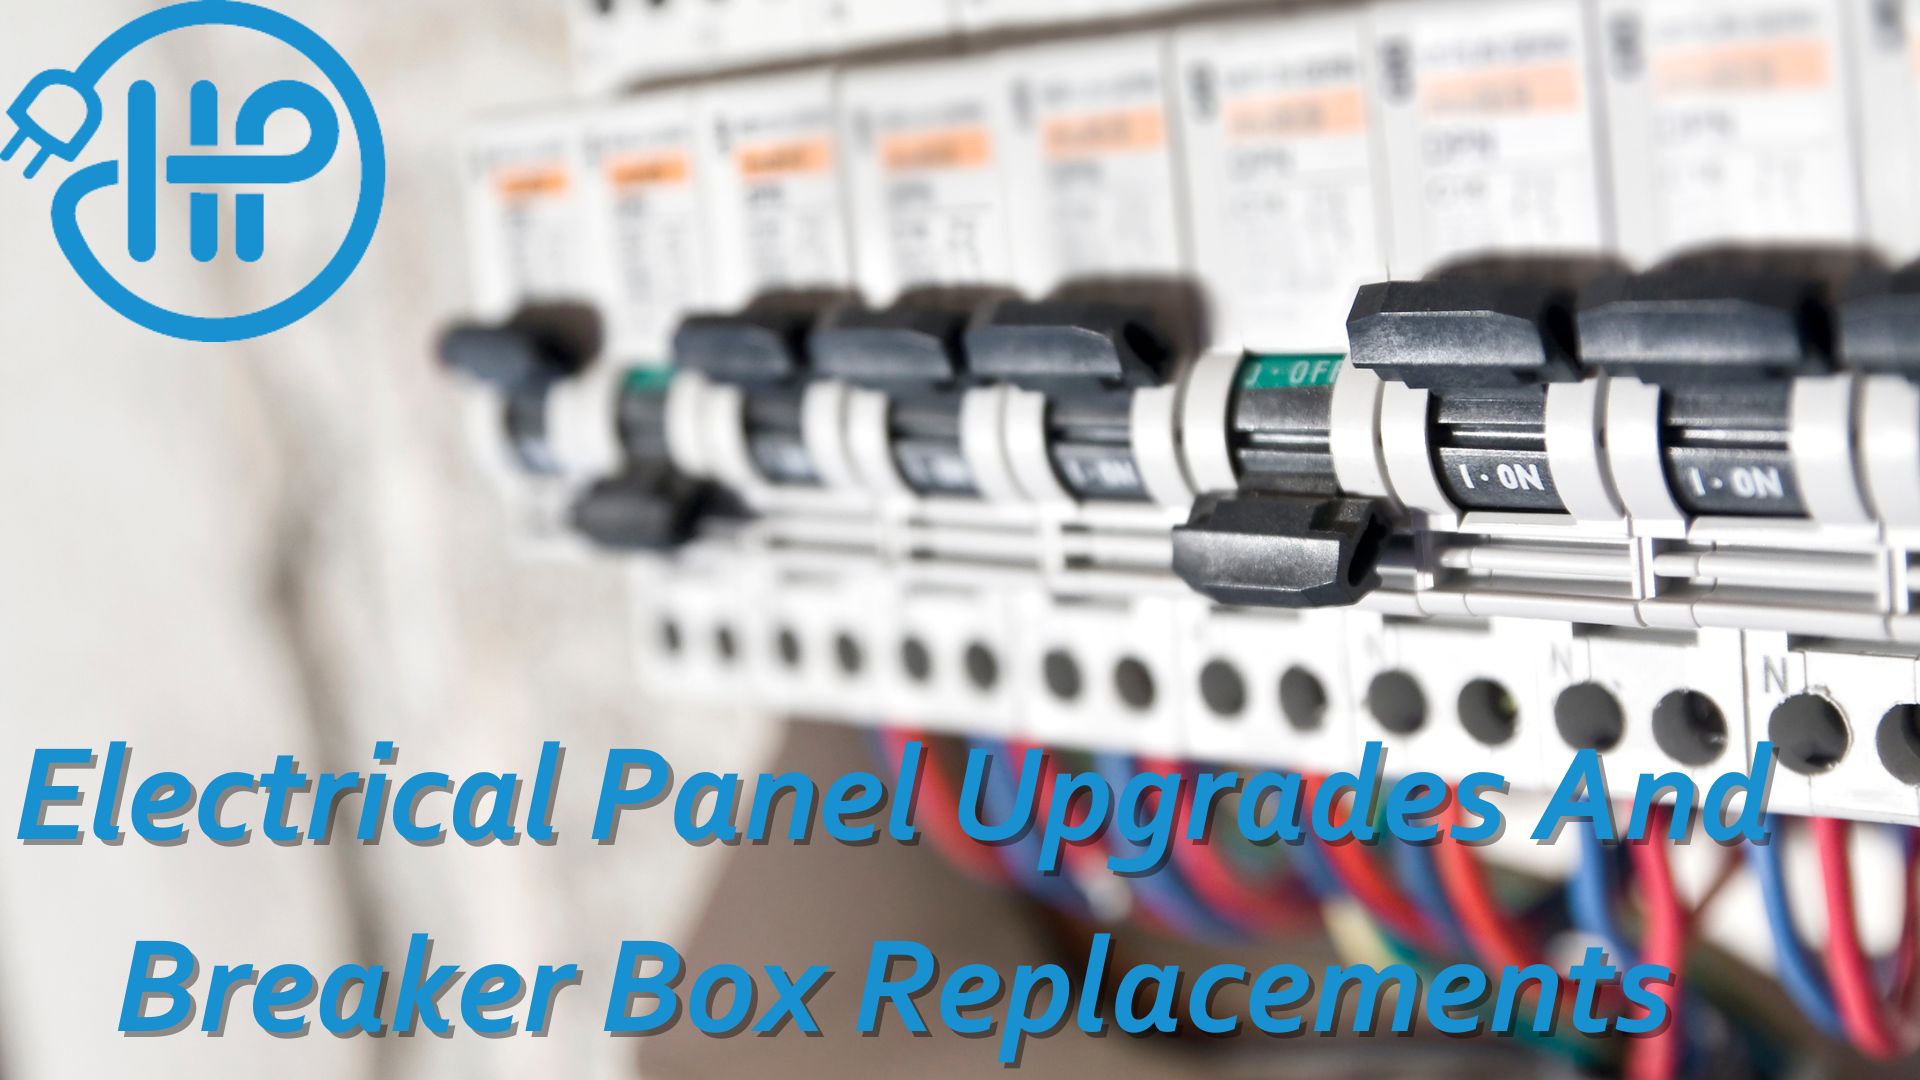 Electrical Panel Upgrade And Breaker Box Replacement at Hauer Power